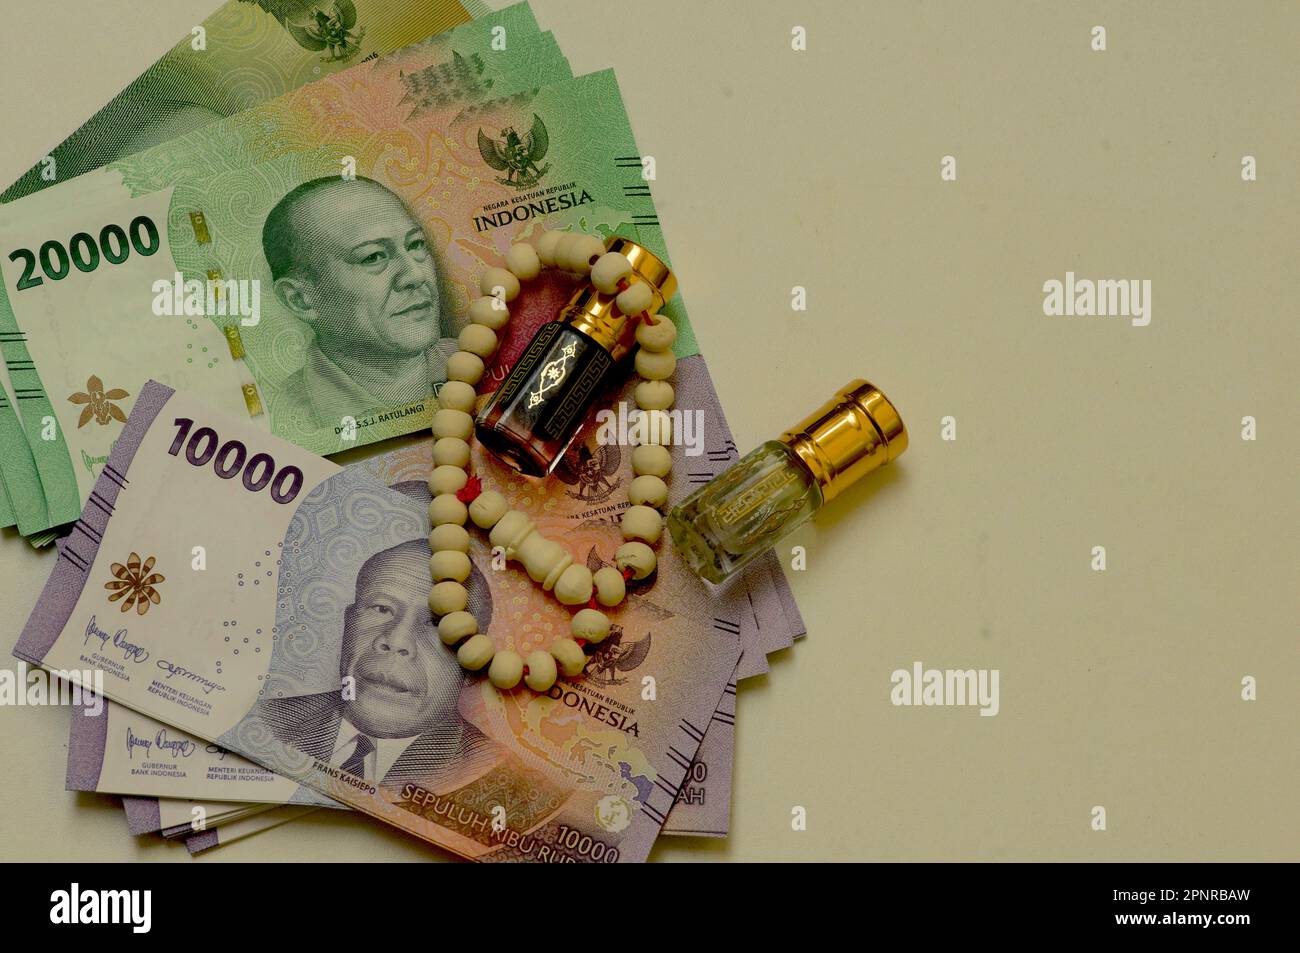 Close up of money, Indonesian rupiah banknote and perfume and prayer beads, in shallow focus Stock Photo